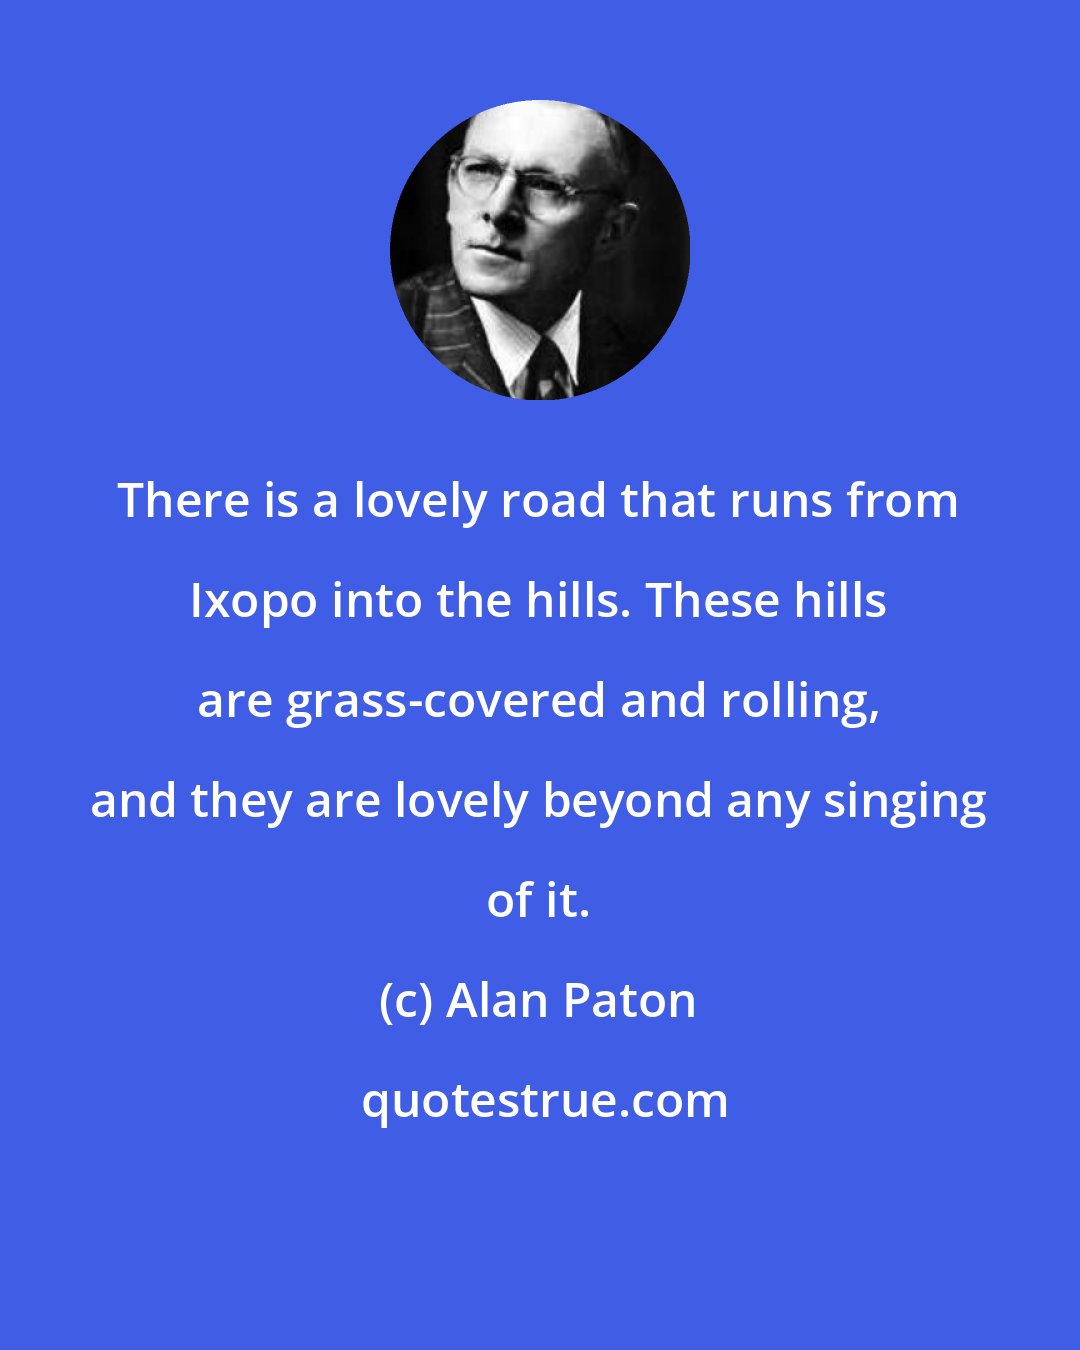 Alan Paton: There is a lovely road that runs from Ixopo into the hills. These hills are grass-covered and rolling, and they are lovely beyond any singing of it.